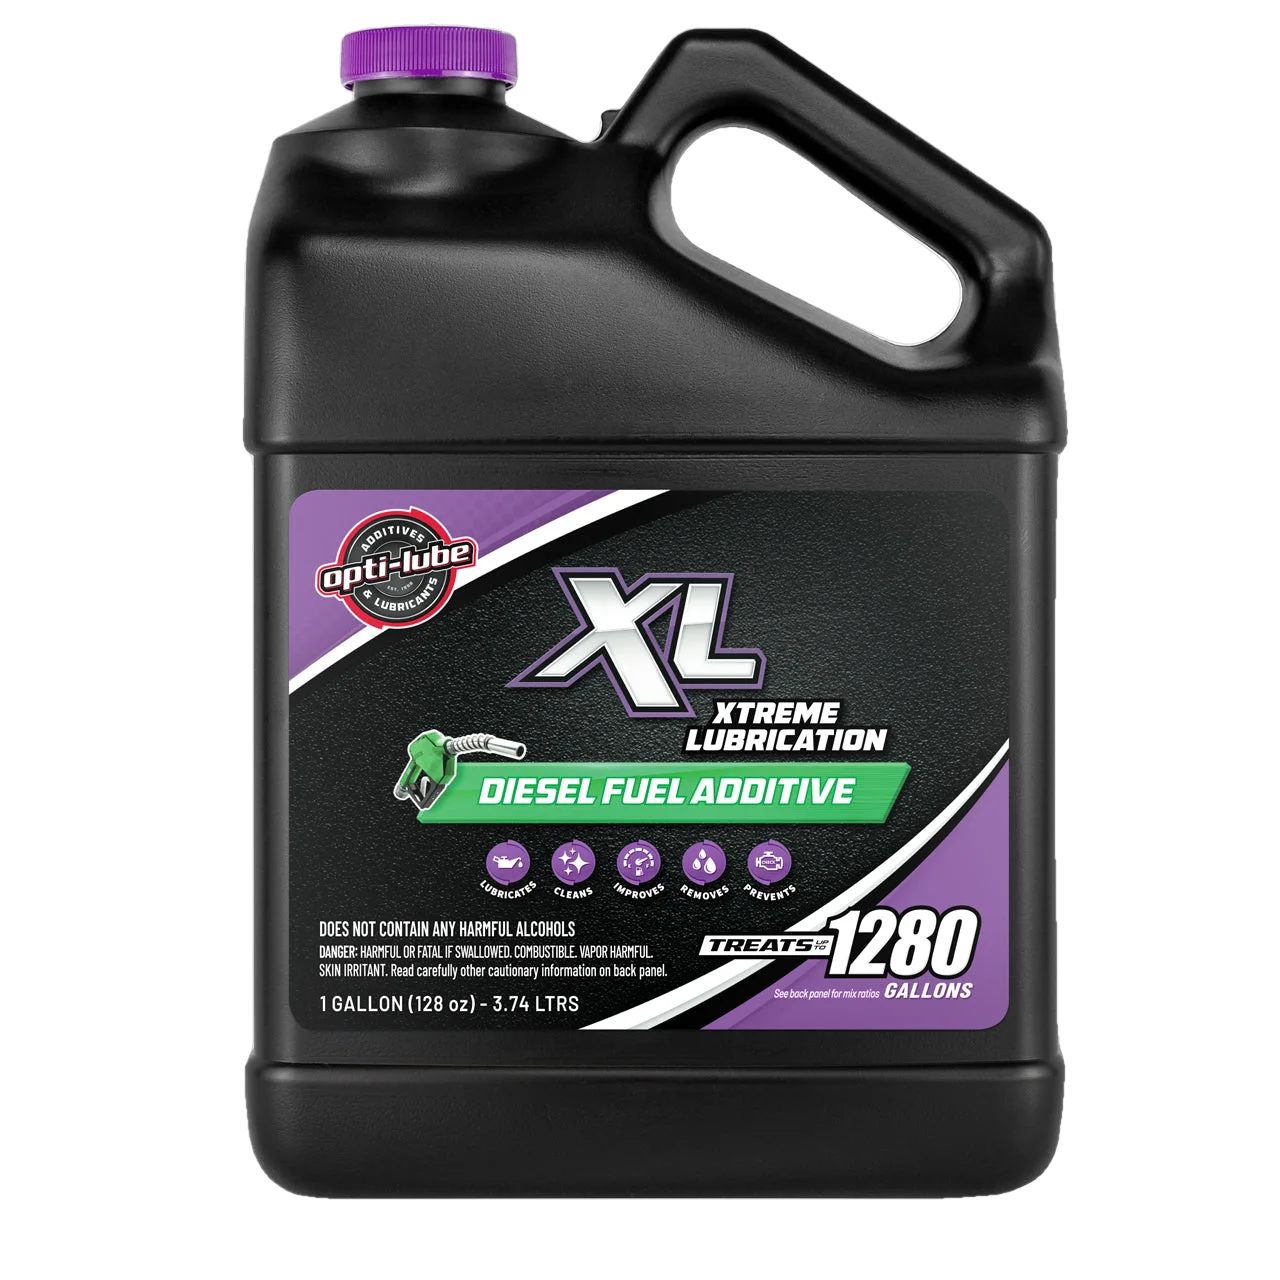 Opti-Lube XL Xtreme Lubricant Diesel Fuel Additive: 1 Gallon with Accessories